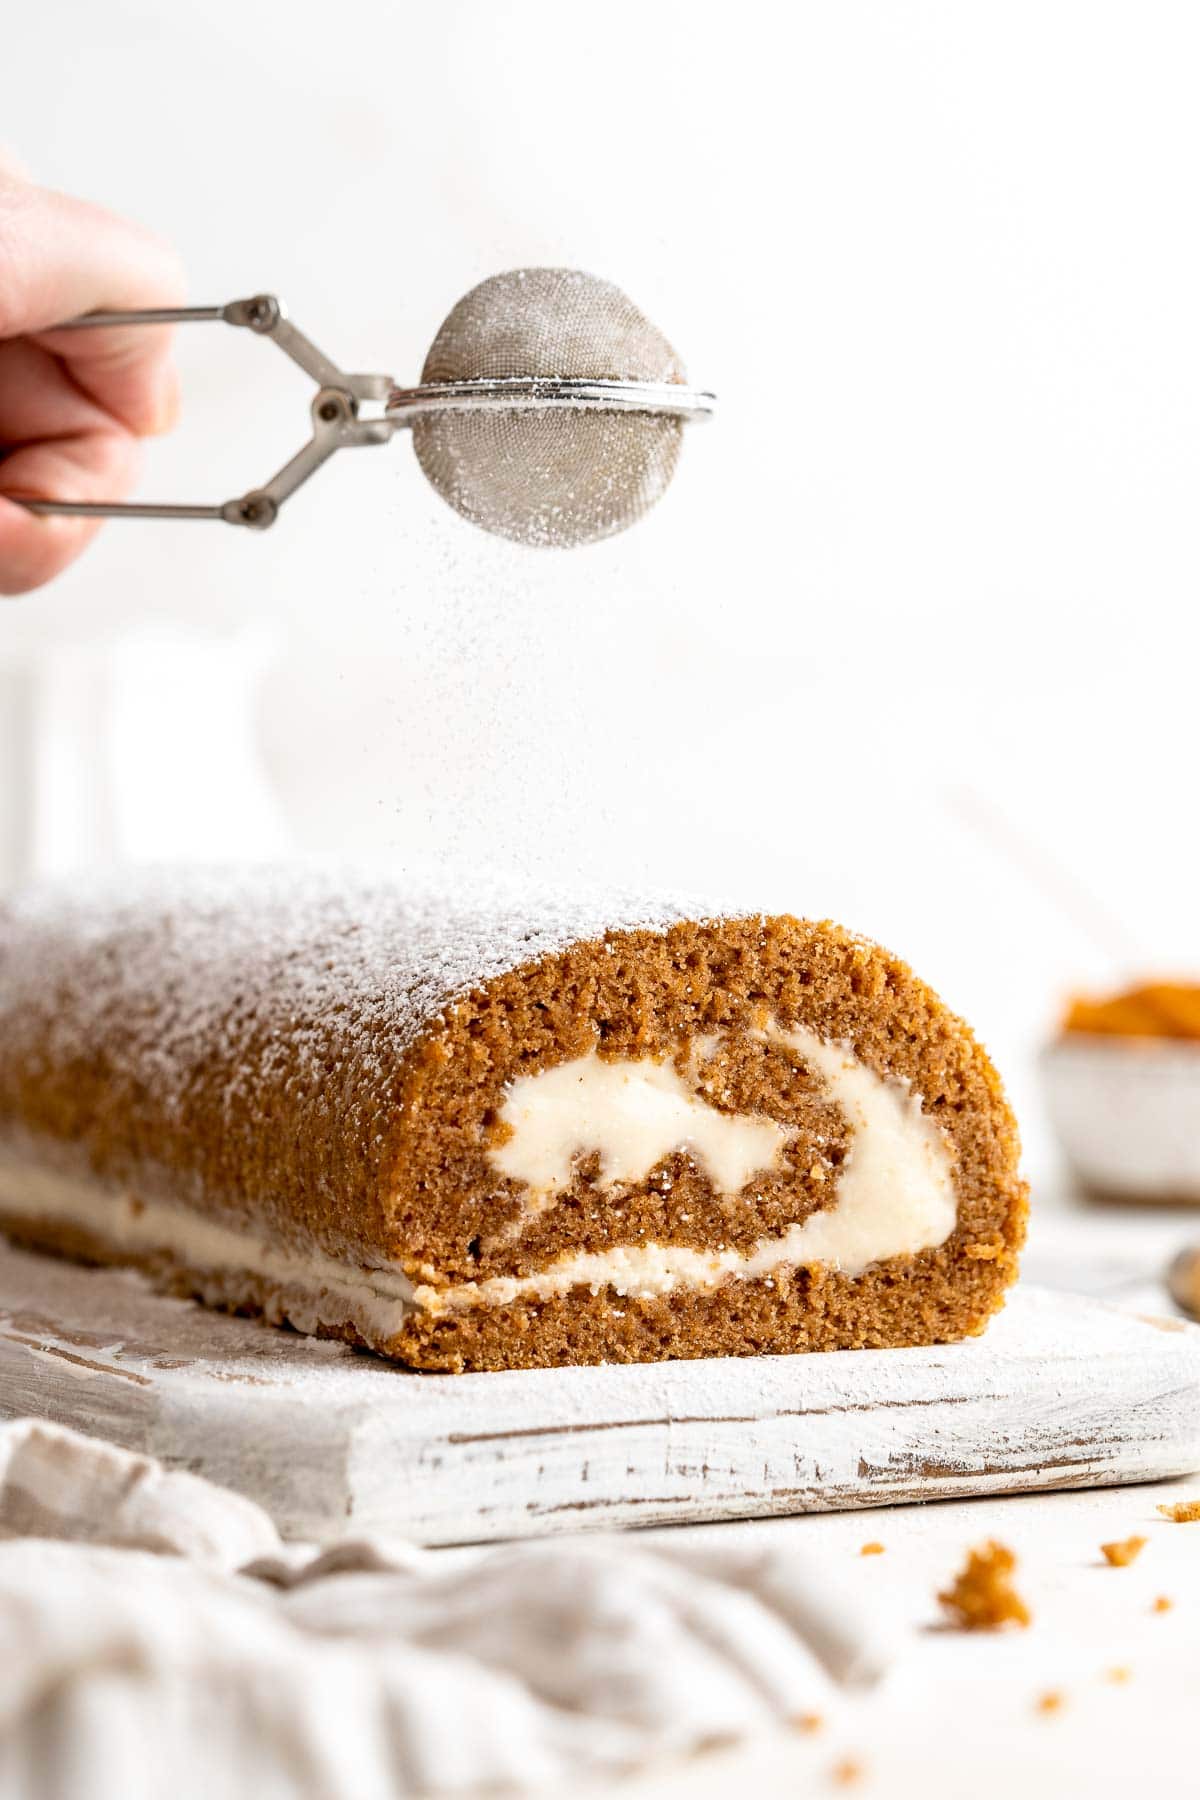 Celebrate the flavors of fall with a show-stopping Pumpkin Roll featuring a tender pumpkin spice cake swirled around a rich cream cheese filling. | aheadofthyme.com